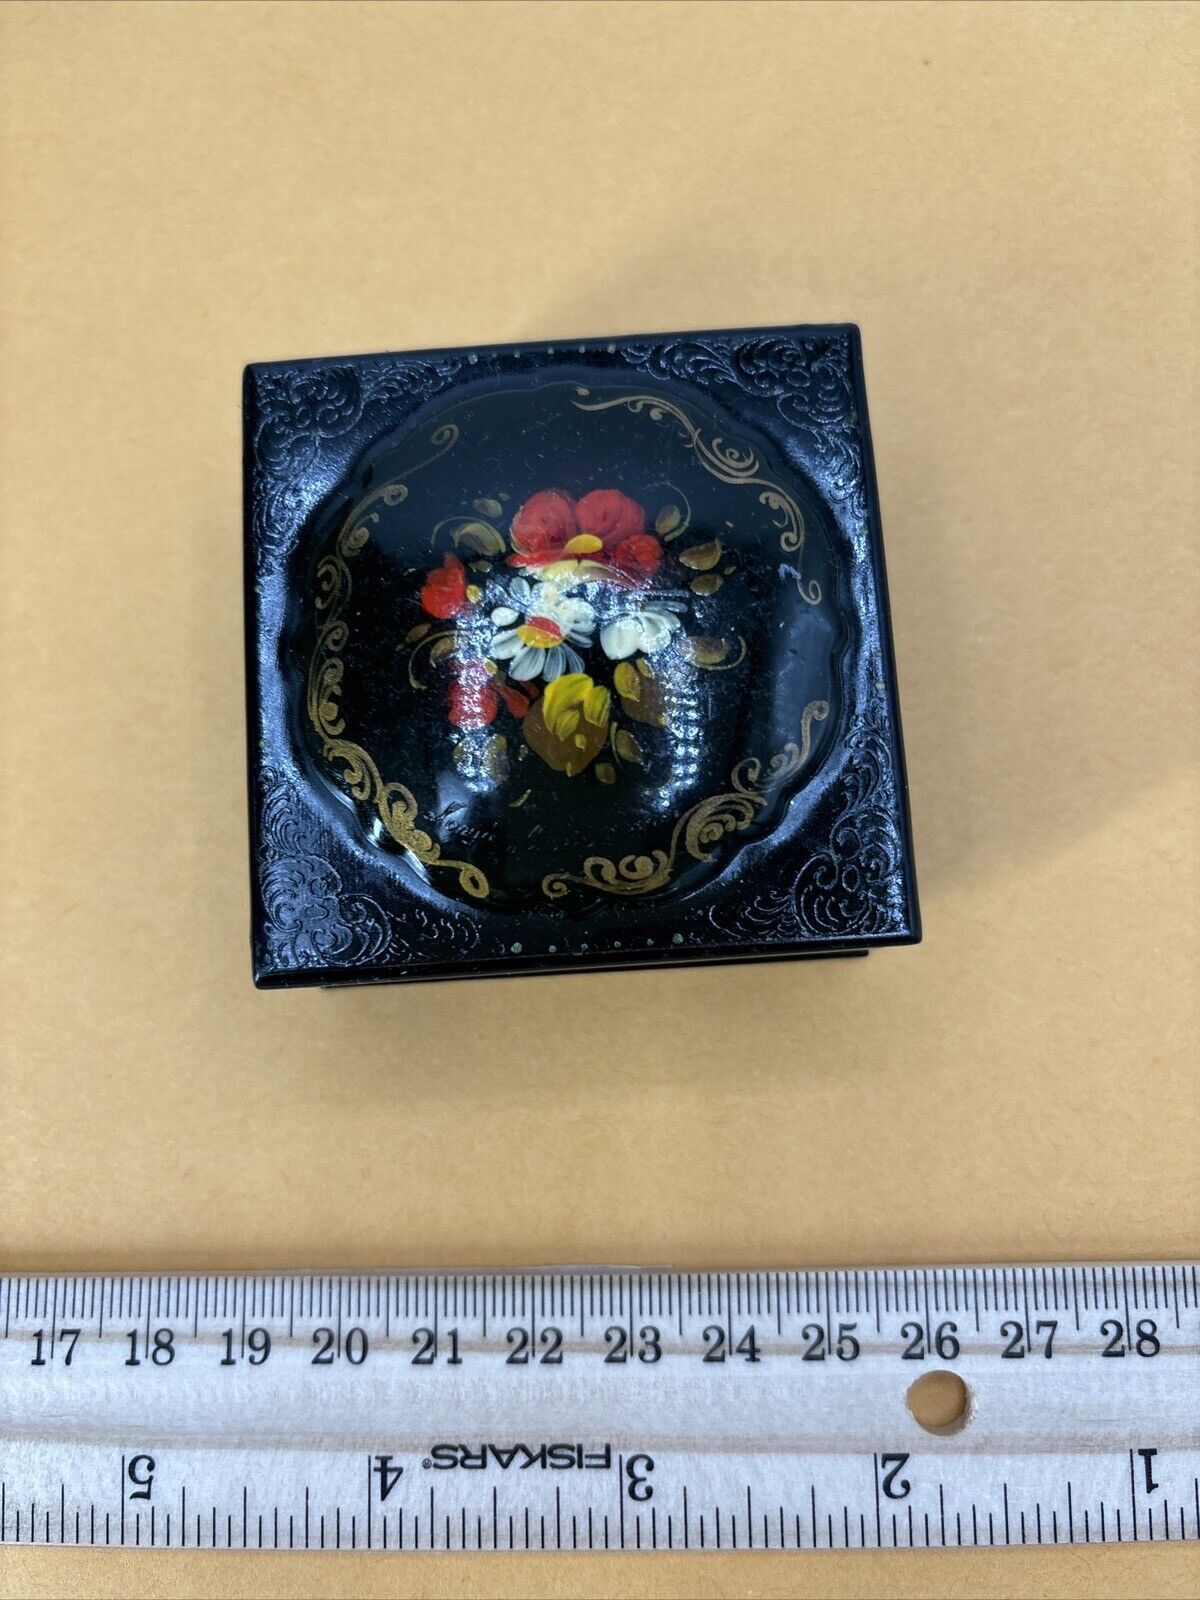 Signed Etched Vintage Russian Lacquer Hand Painted Square Trinket Box